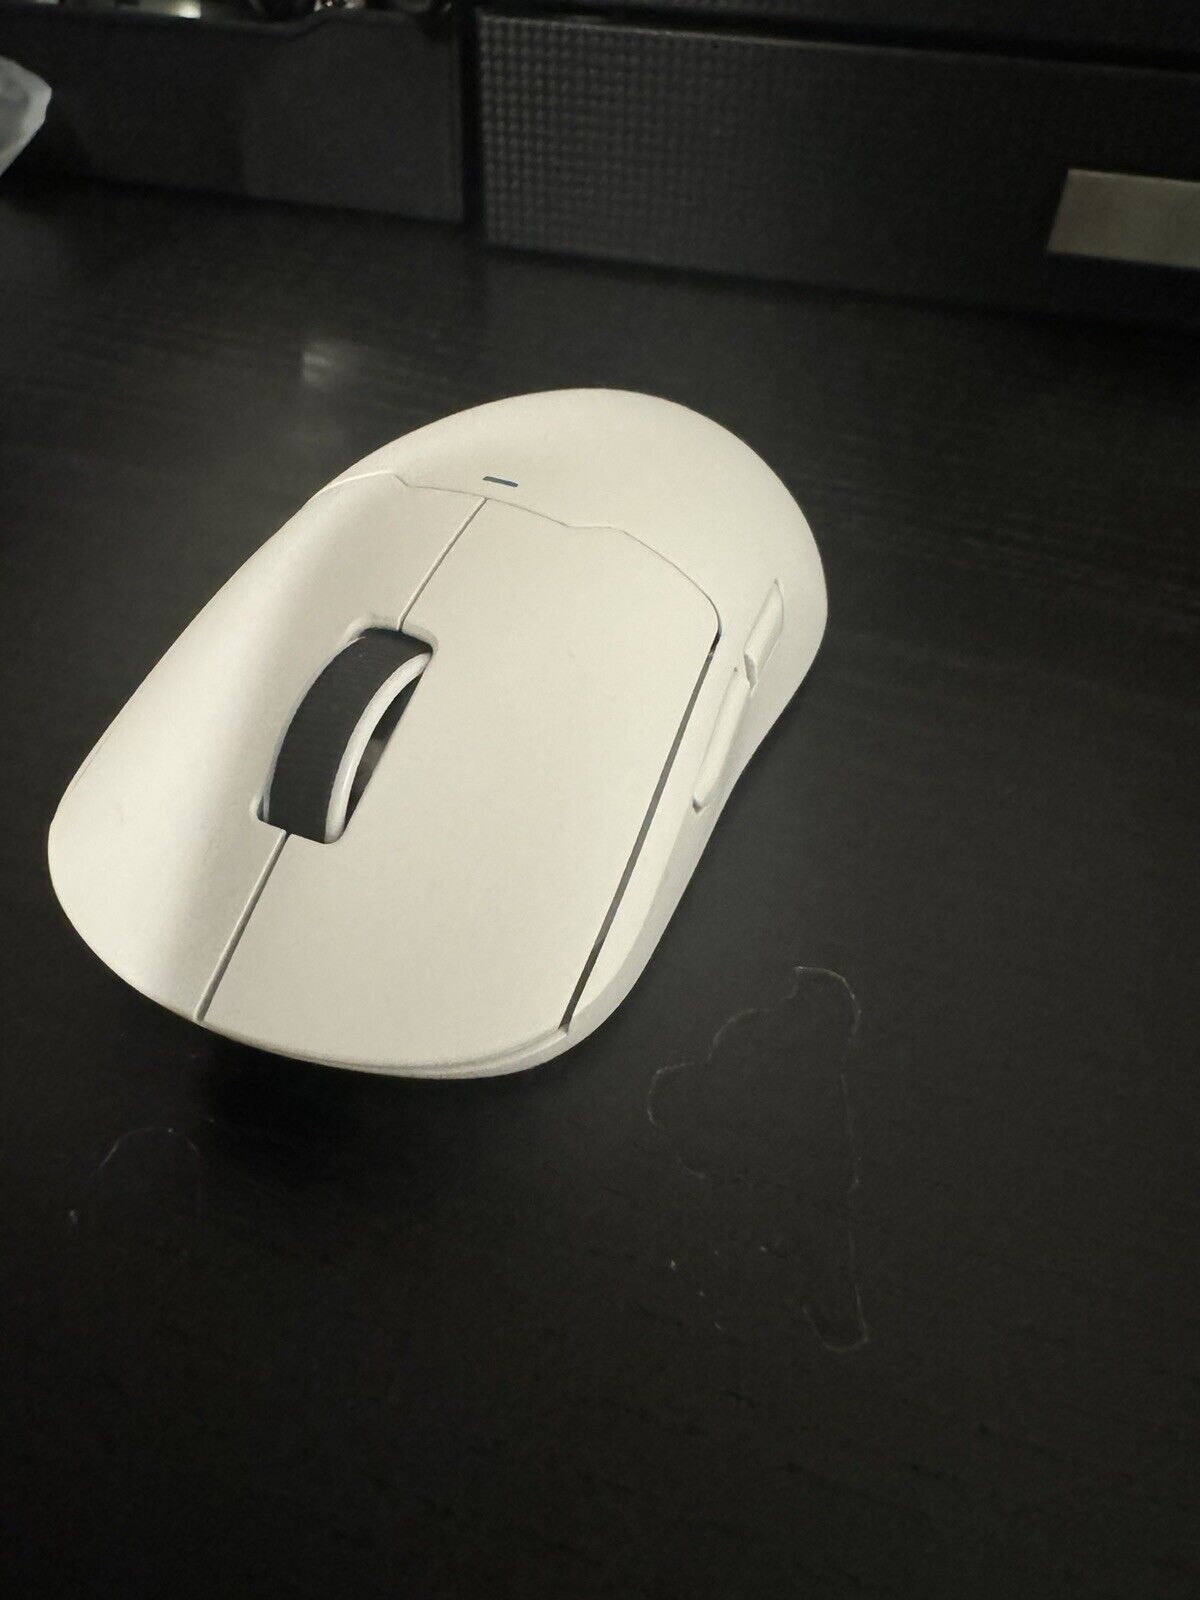 MCHOSE A5 WIRELESS GAMING MOUSE (GPRO CLONE)